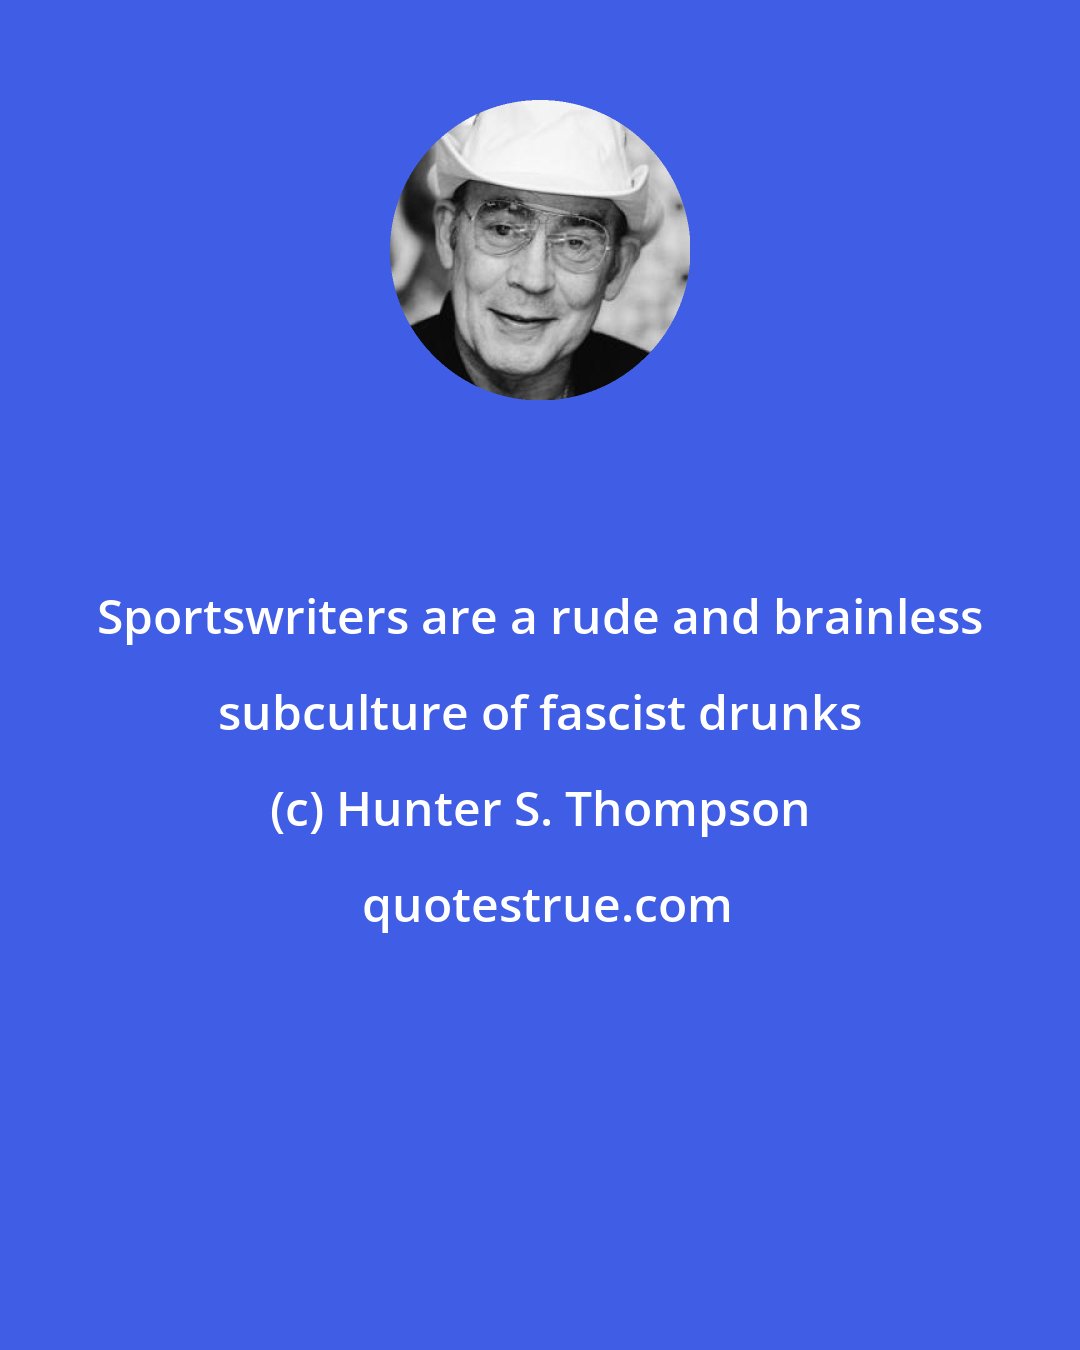 Hunter S. Thompson: Sportswriters are a rude and brainless subculture of fascist drunks